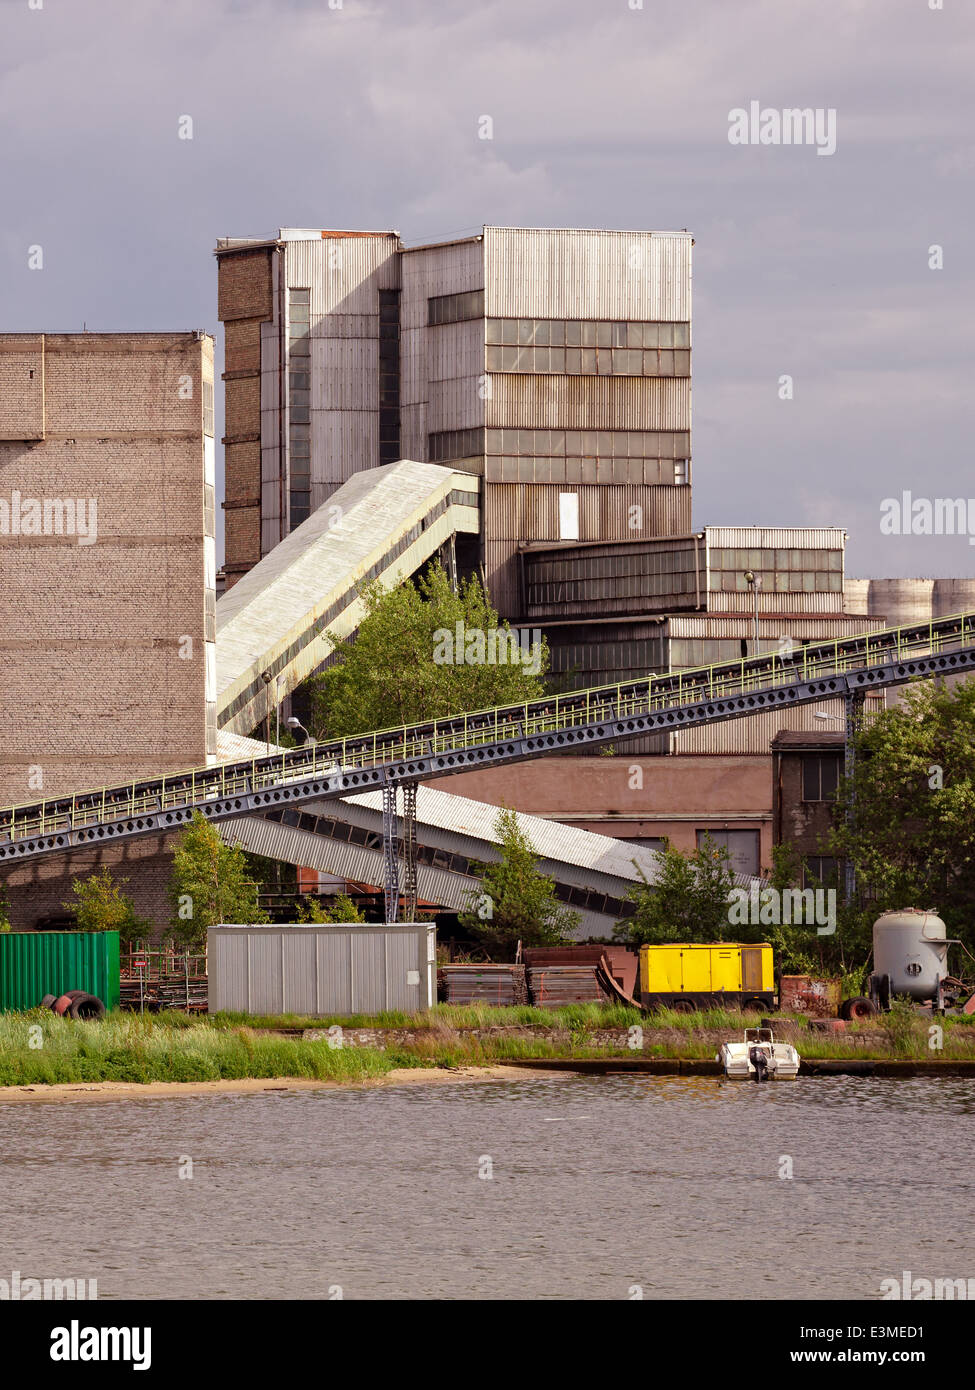 Shaft tower loader and conveyors to transport coal. Stock Photo